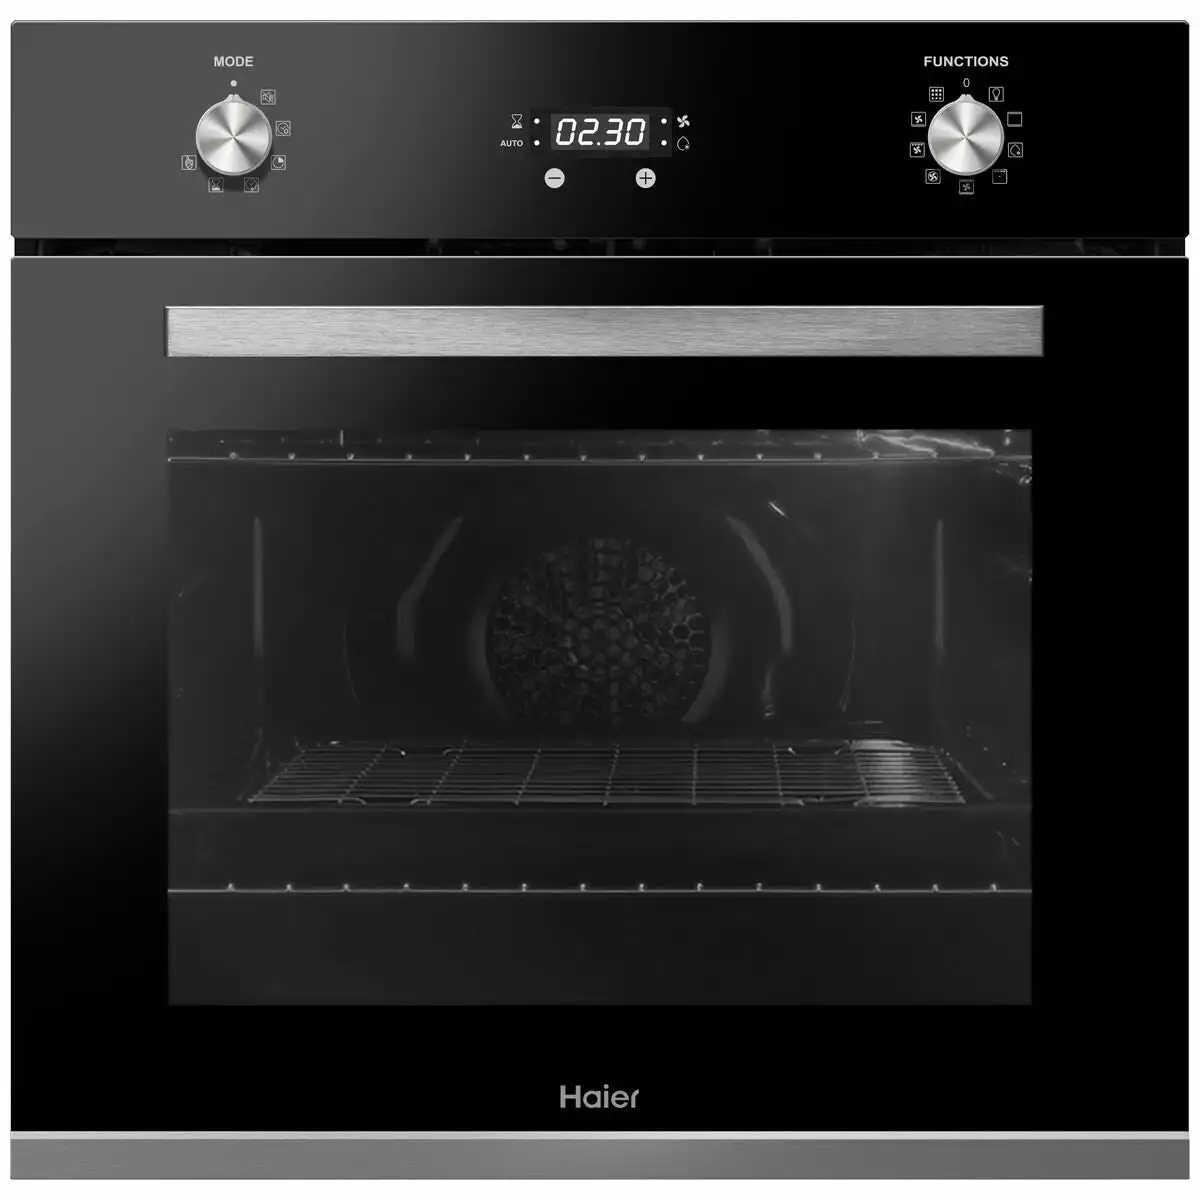 Haier 60cm Built-In Self-Cleaning Pyrolytic Oven